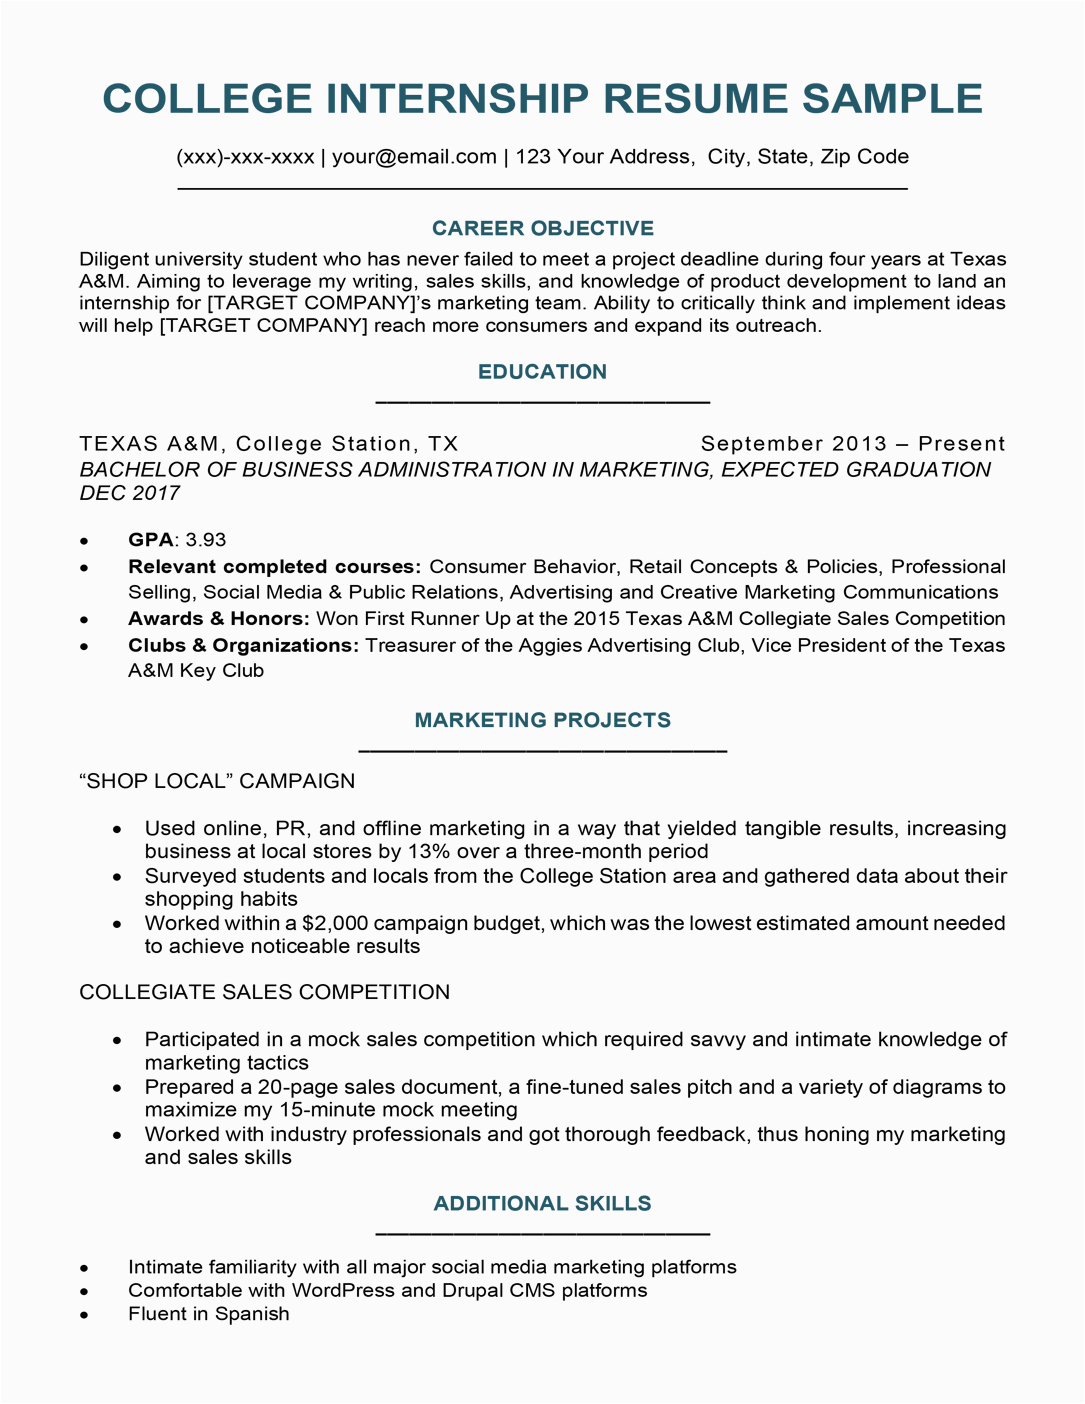 Simple Resume Template for College Students College Student Resume Sample & Writing Tips